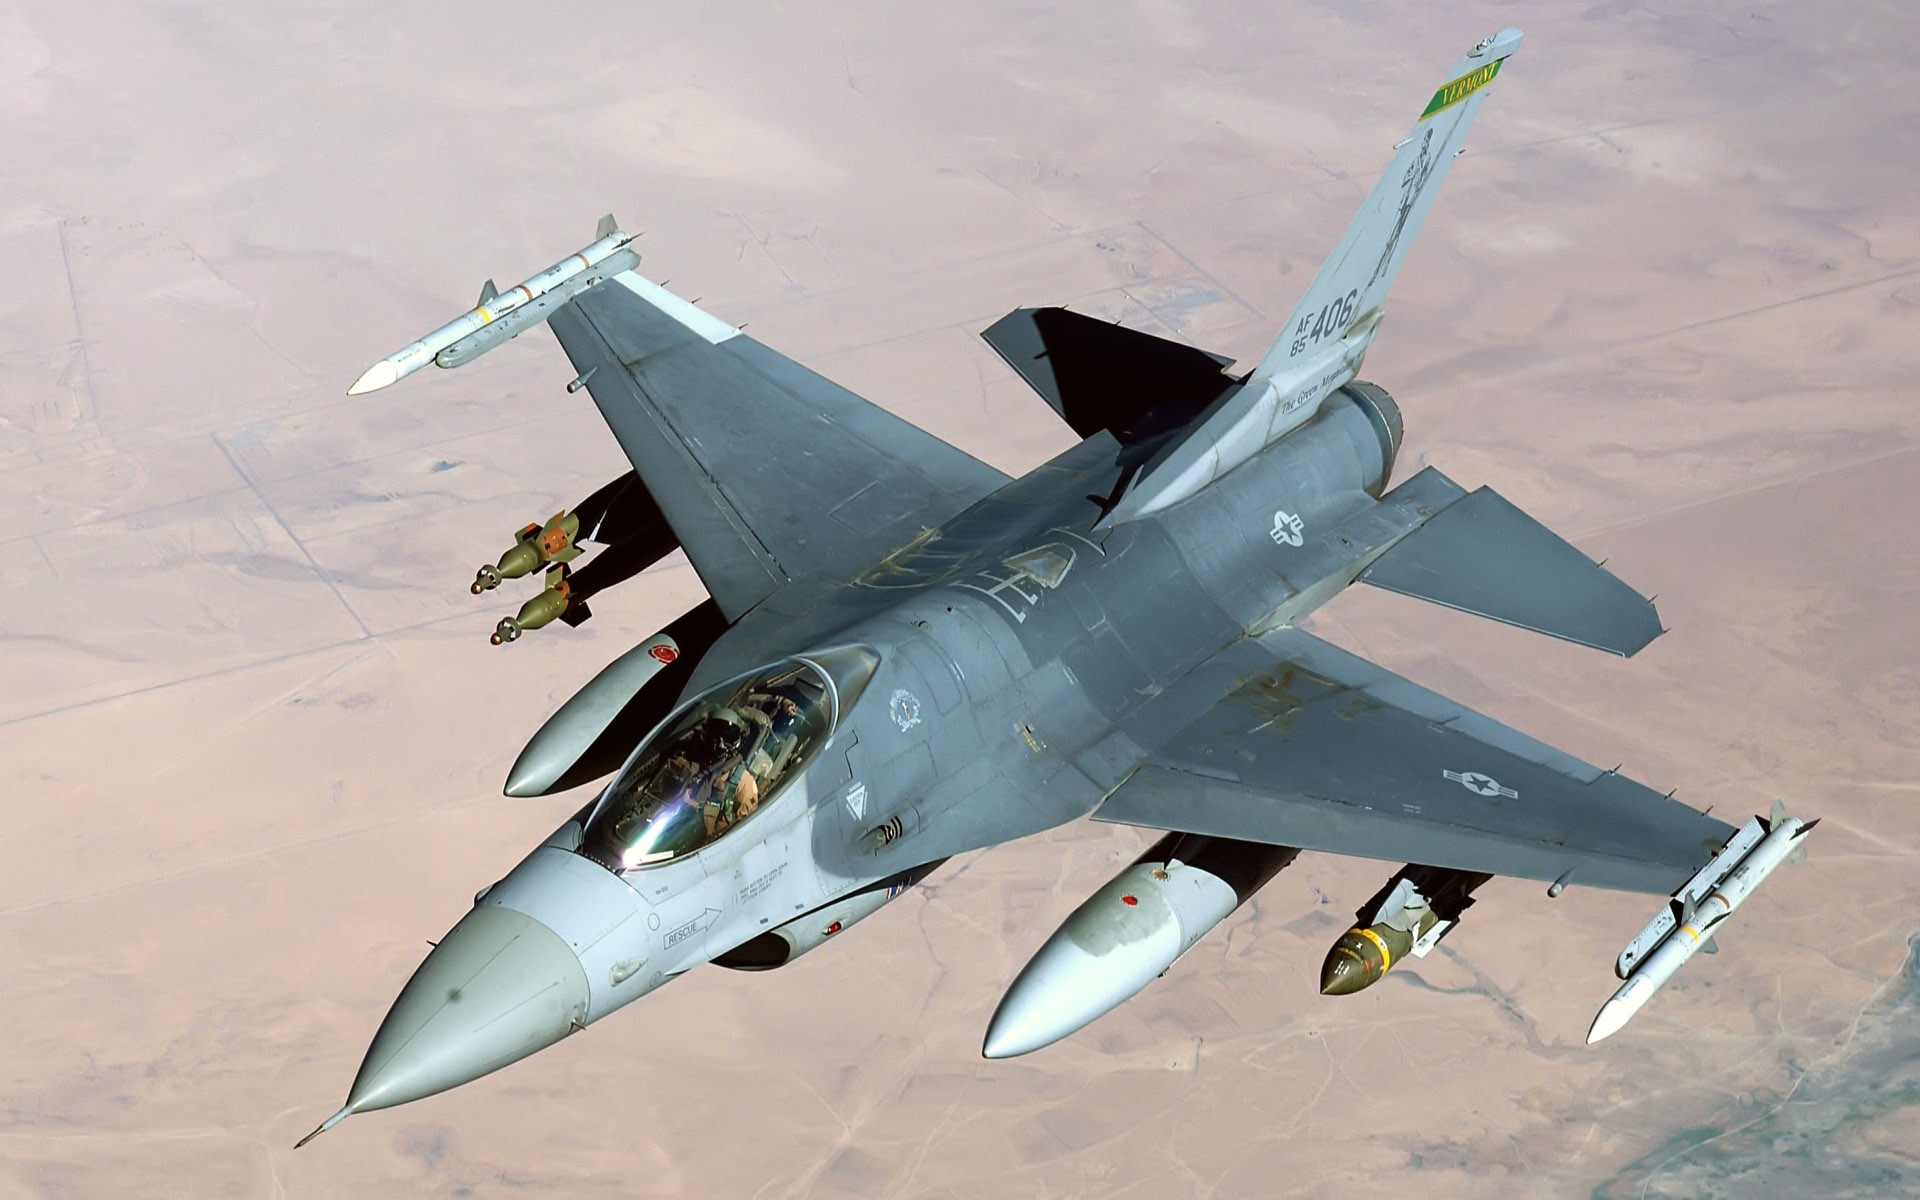 General 1920x1200 airplane General Dynamics F-16 Fighting Falcon military military aircraft aircraft vehicle military vehicle jet fighter Vermont American aircraft General Dynamics